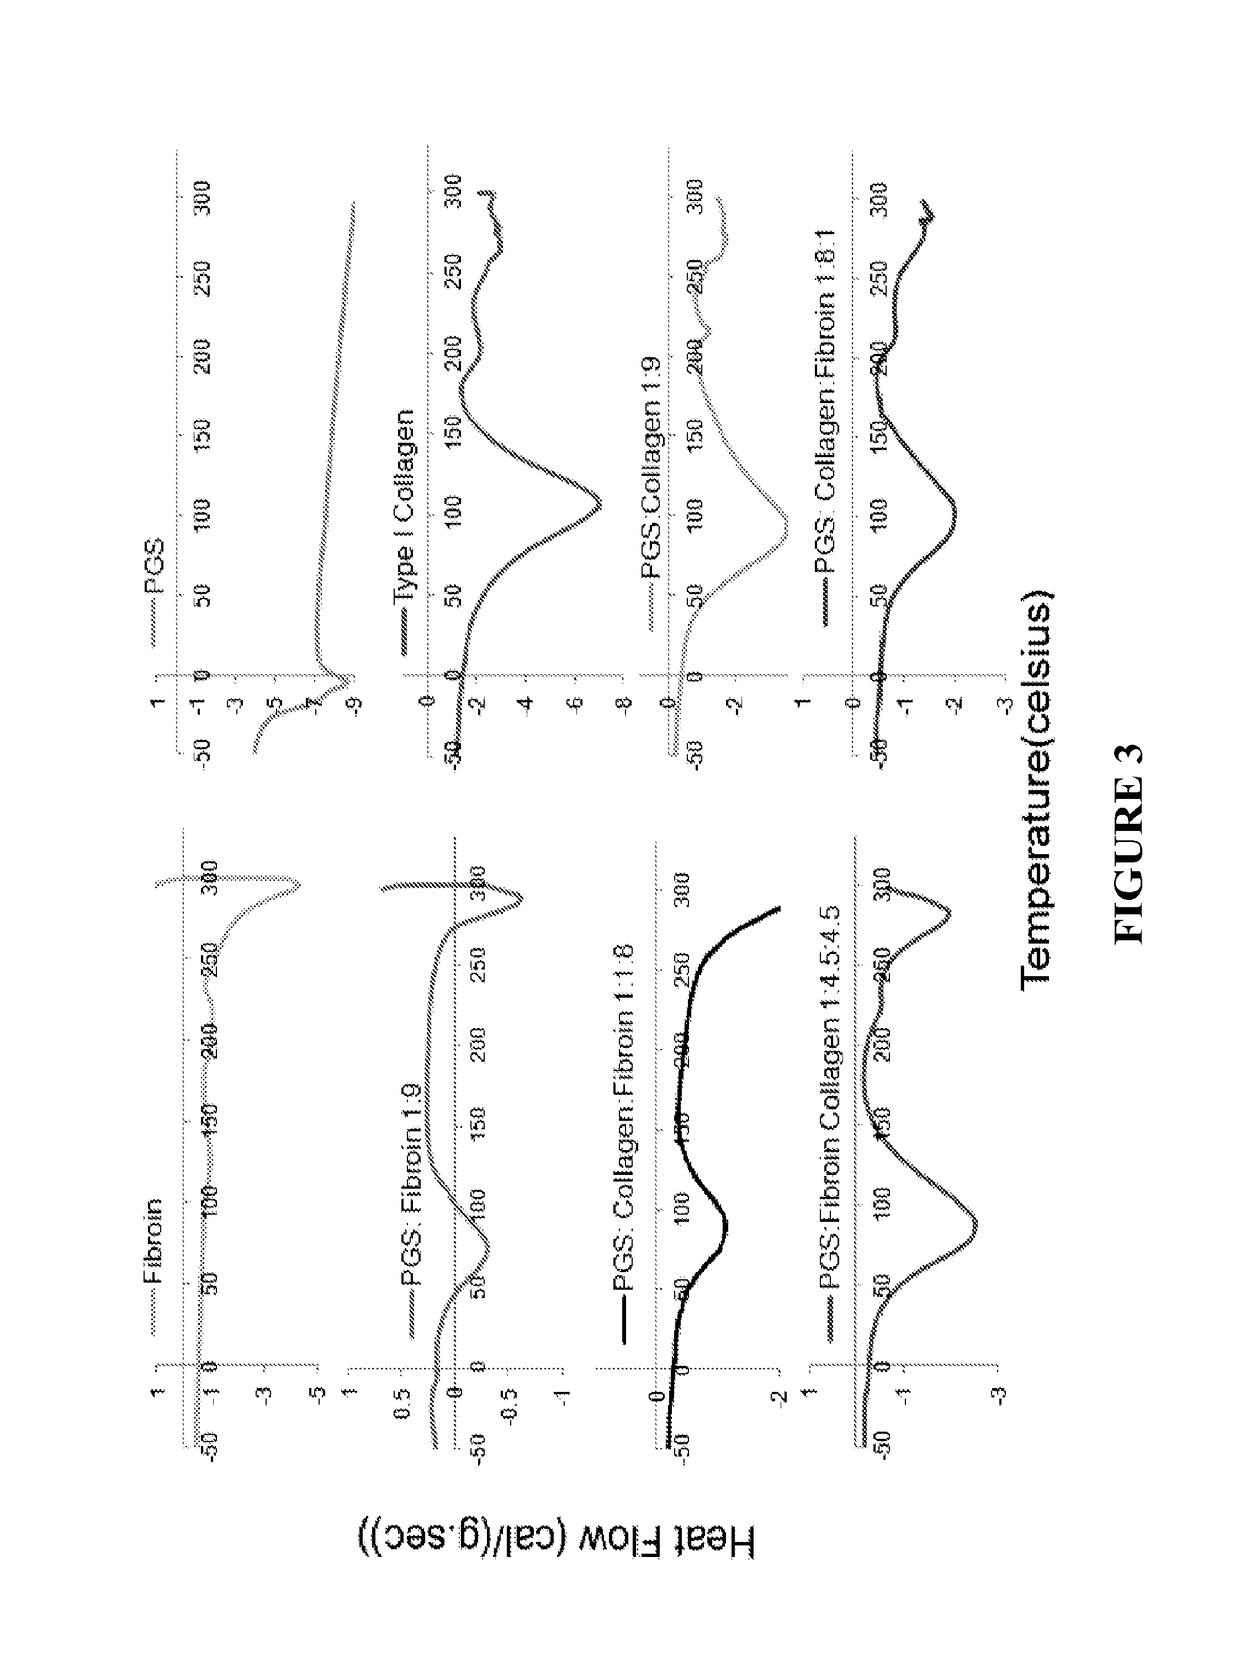 Nanofiber-based graft for heart valve replacement and methods of using the same